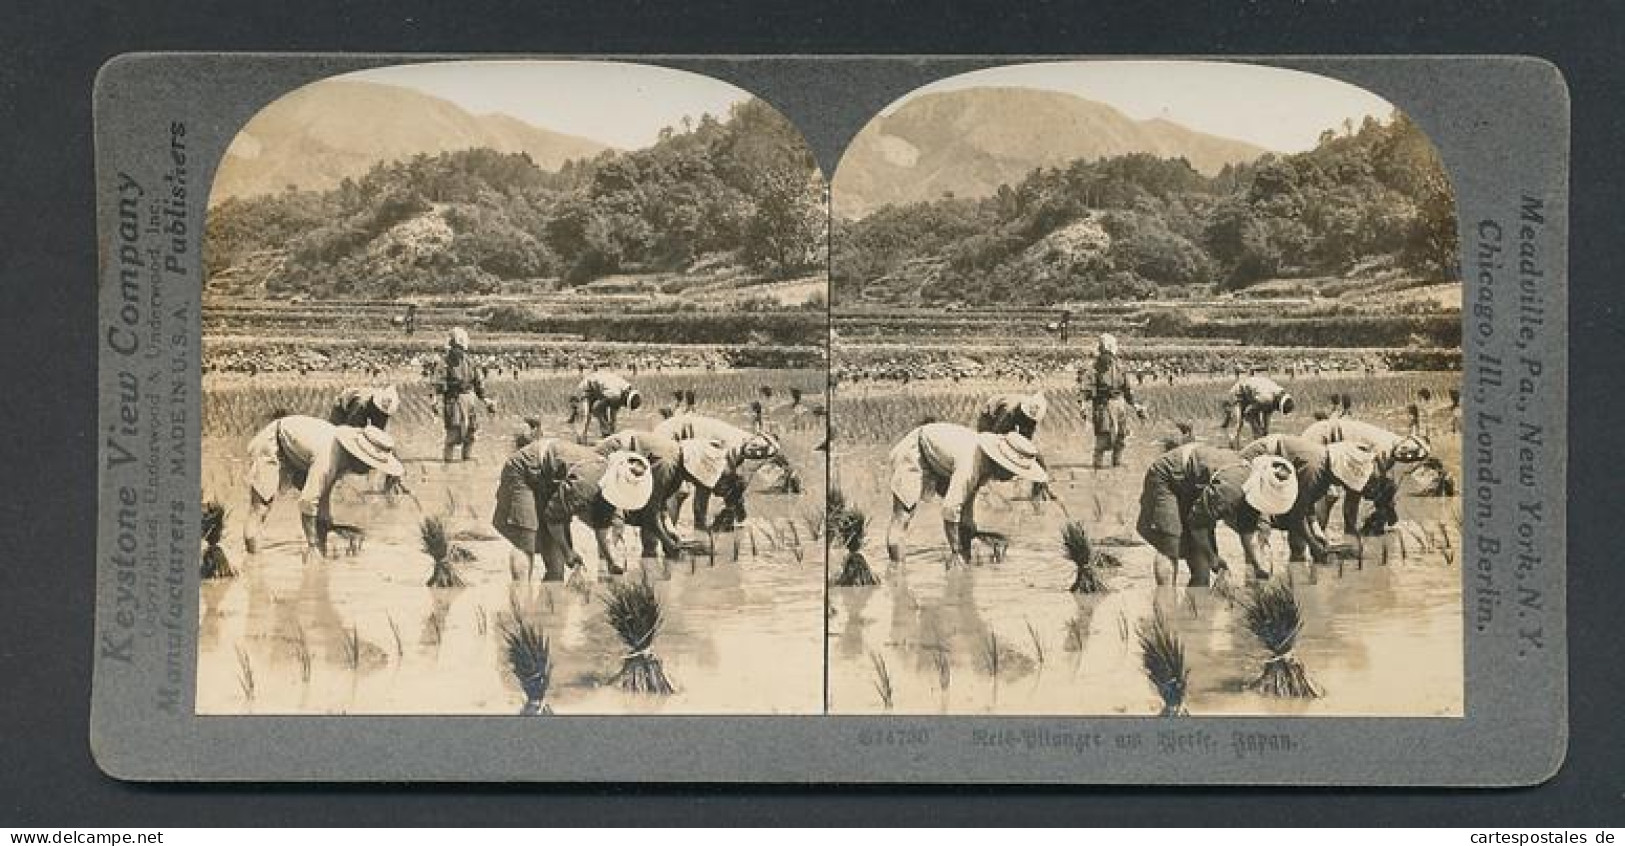 Stereo-Fotografie Keystone View Company, Meadville /Pa, Reis-Pflanzer In Japan  - Professions